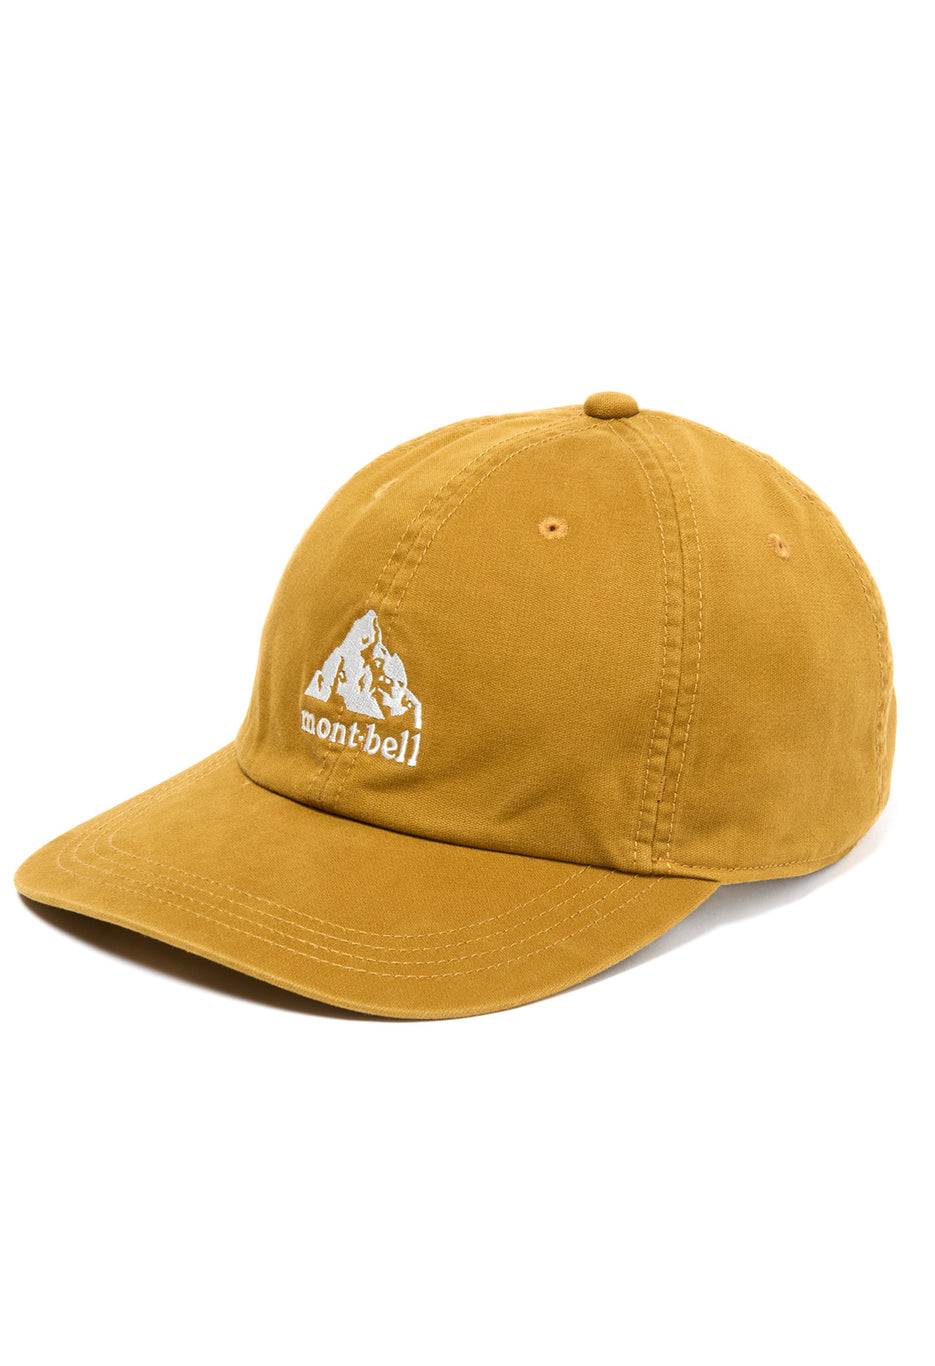 Montbell Washed Out Cotton Cap - Khaki